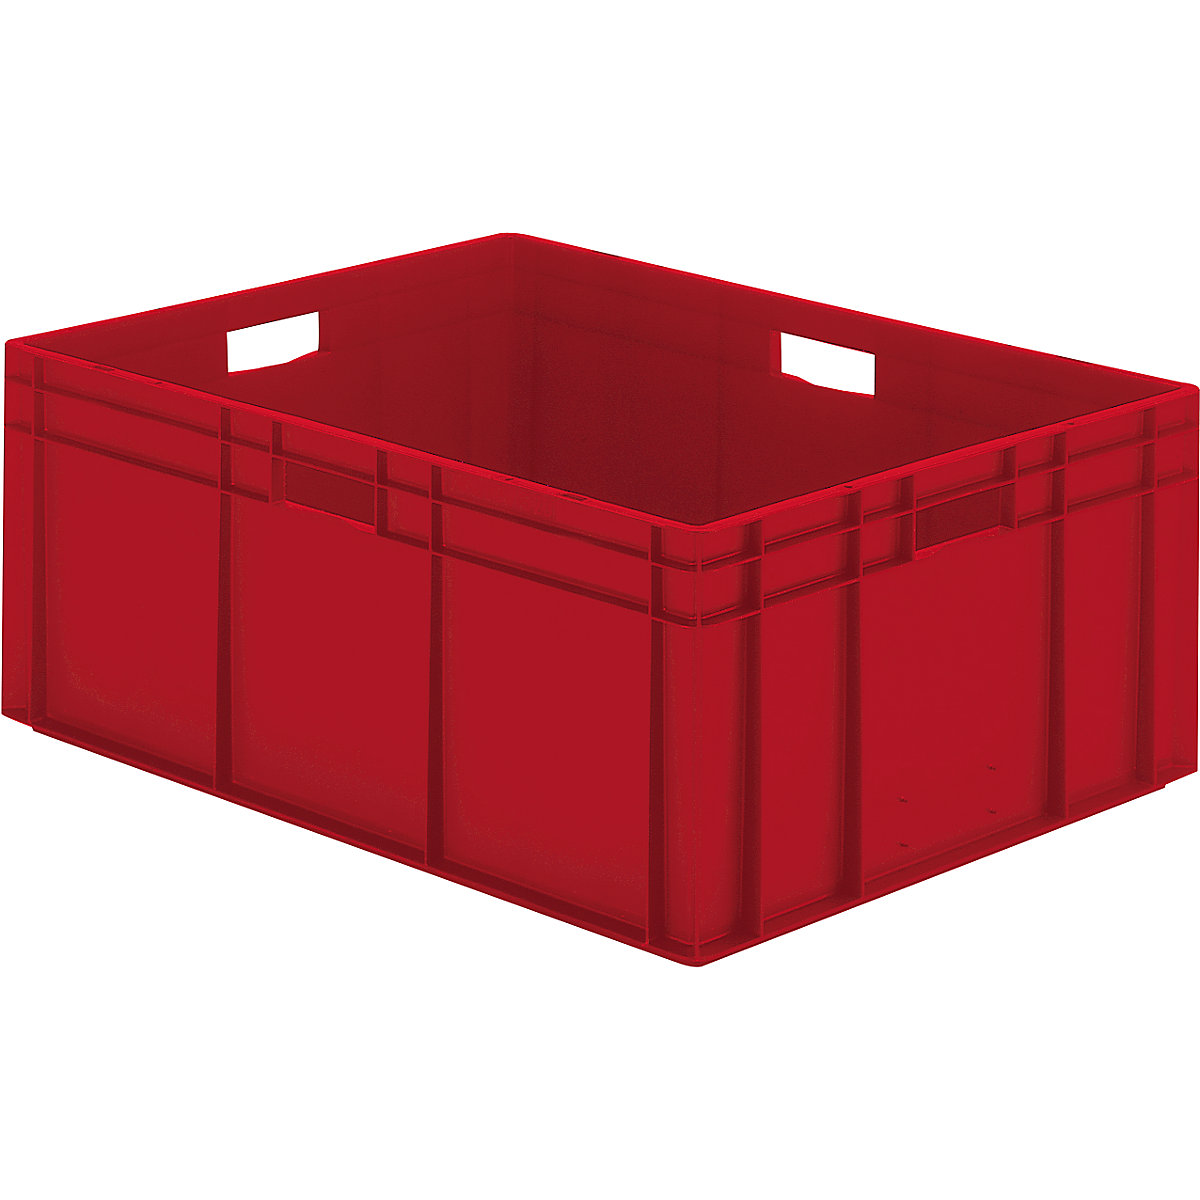 Euro stacking container, closed walls and base, LxWxH 800 x 600 x 320 mm, red, pack of 2